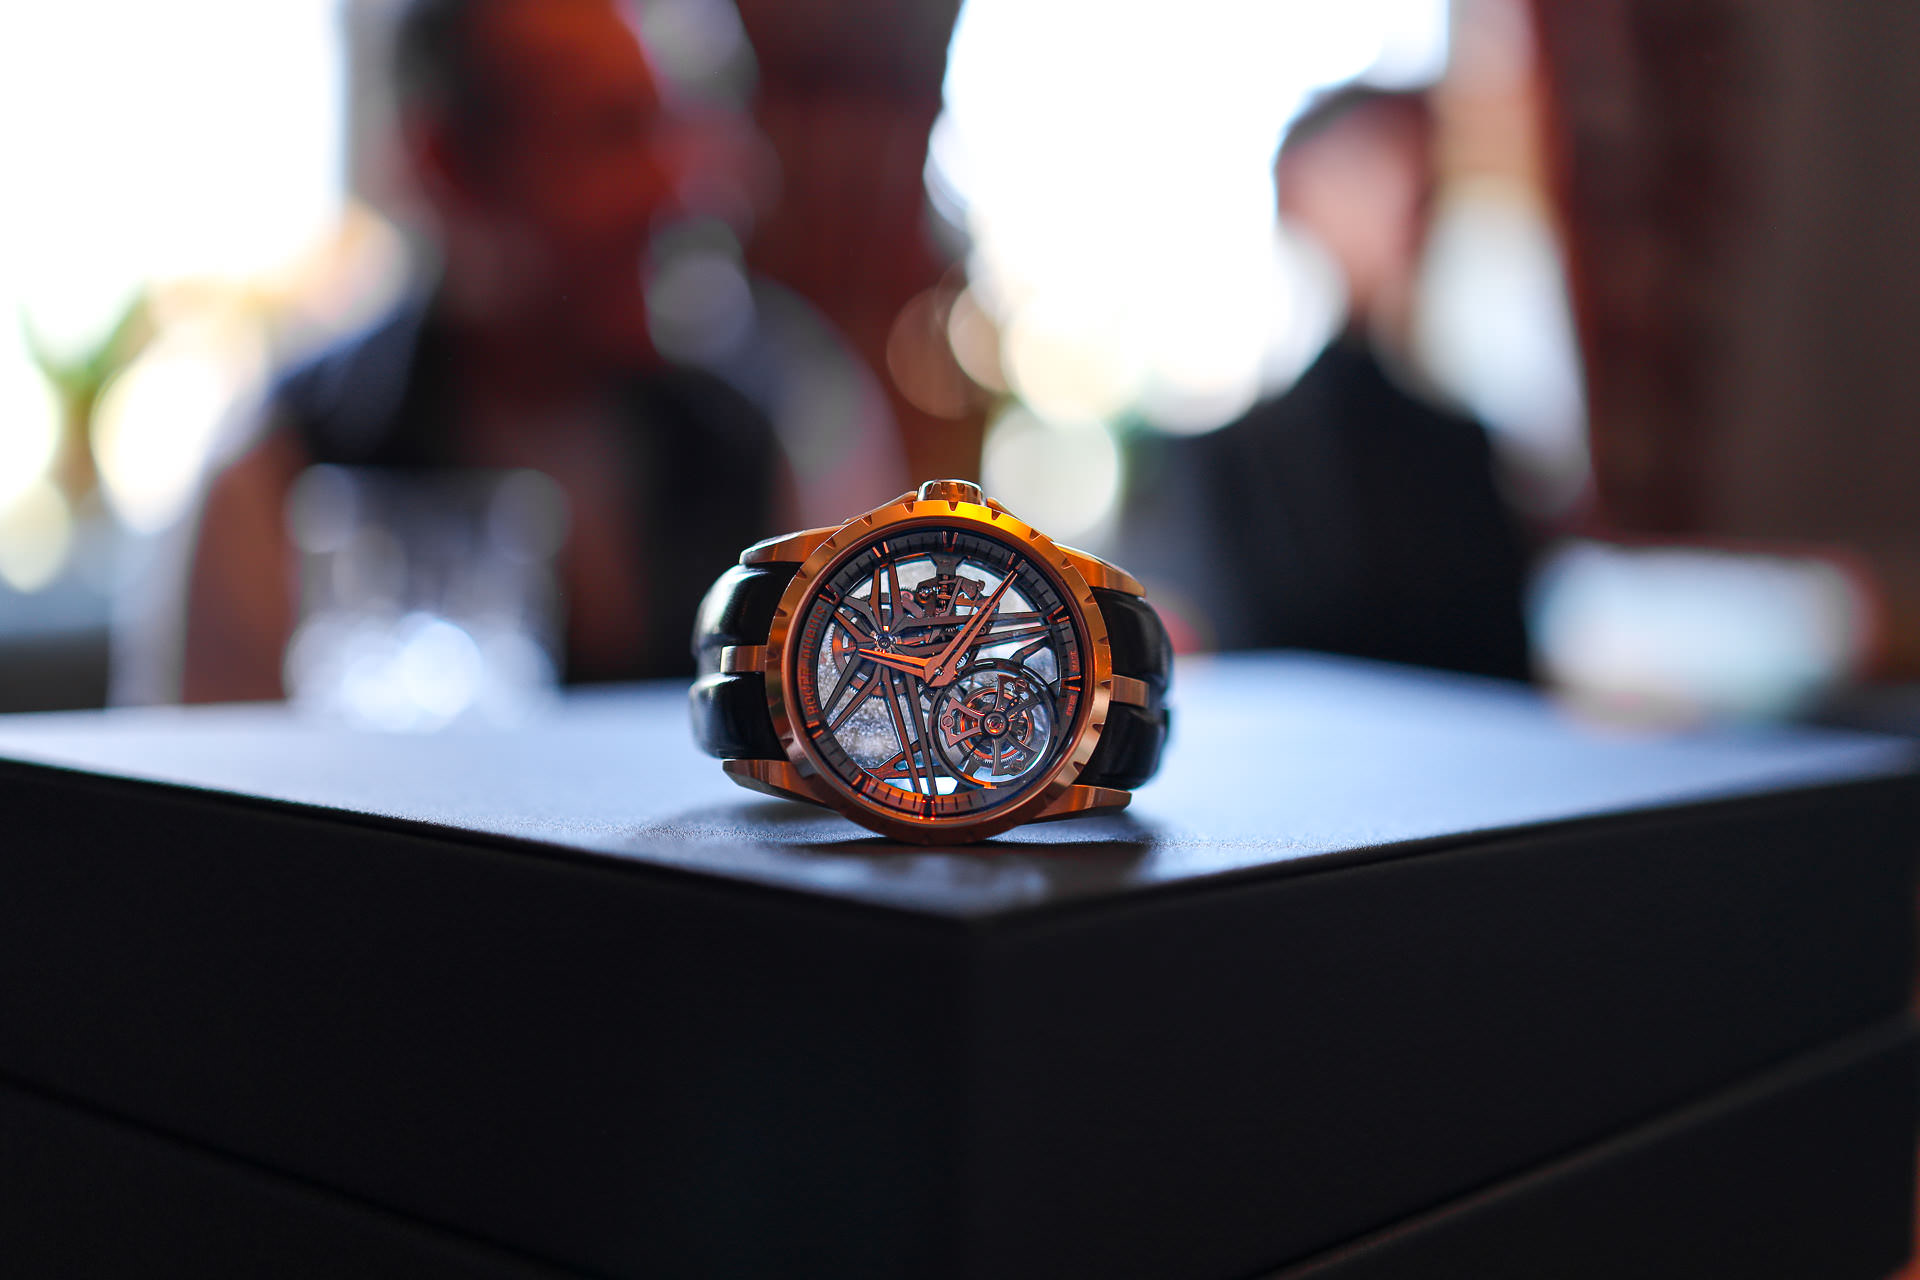 Roger Dubuis Round Table in München